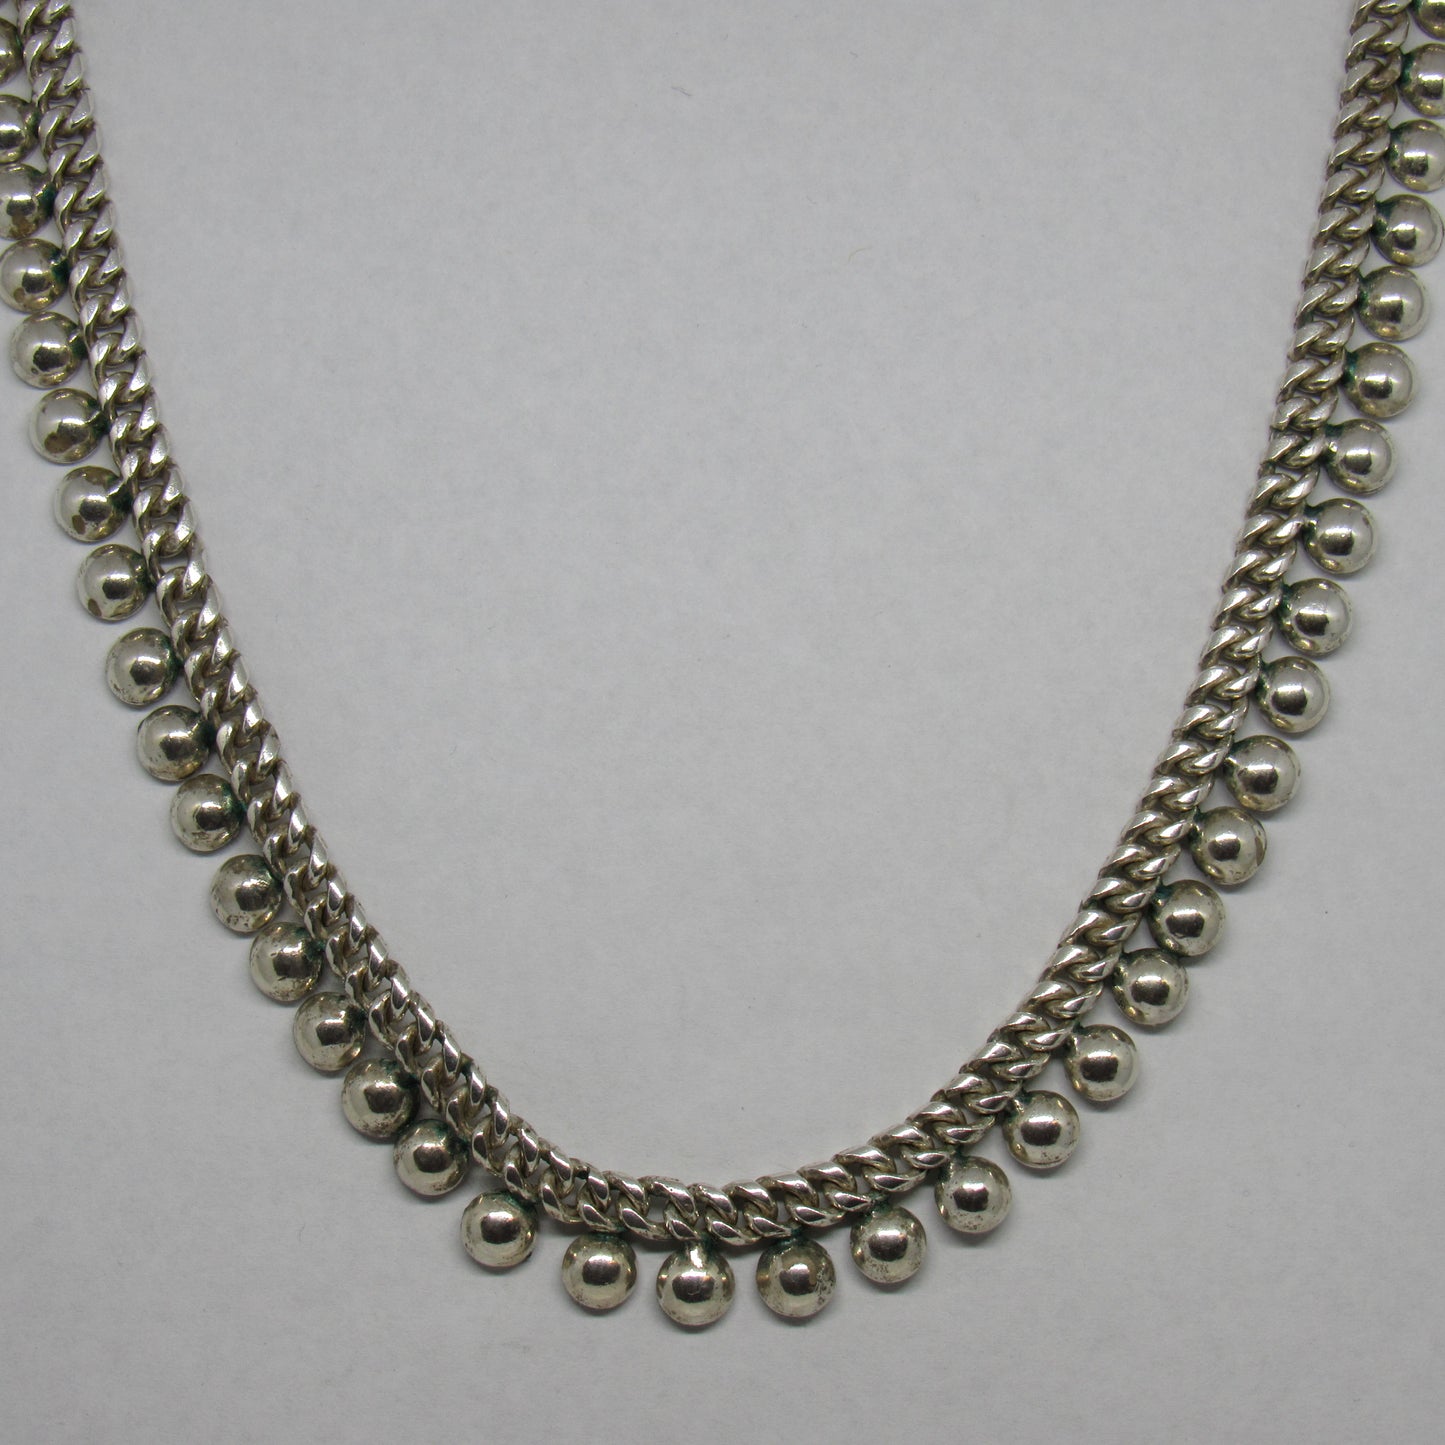 Vintage BA Suarti Bali 925 Sterling Silver Curb Link Ball Choker Necklace - 17 inch